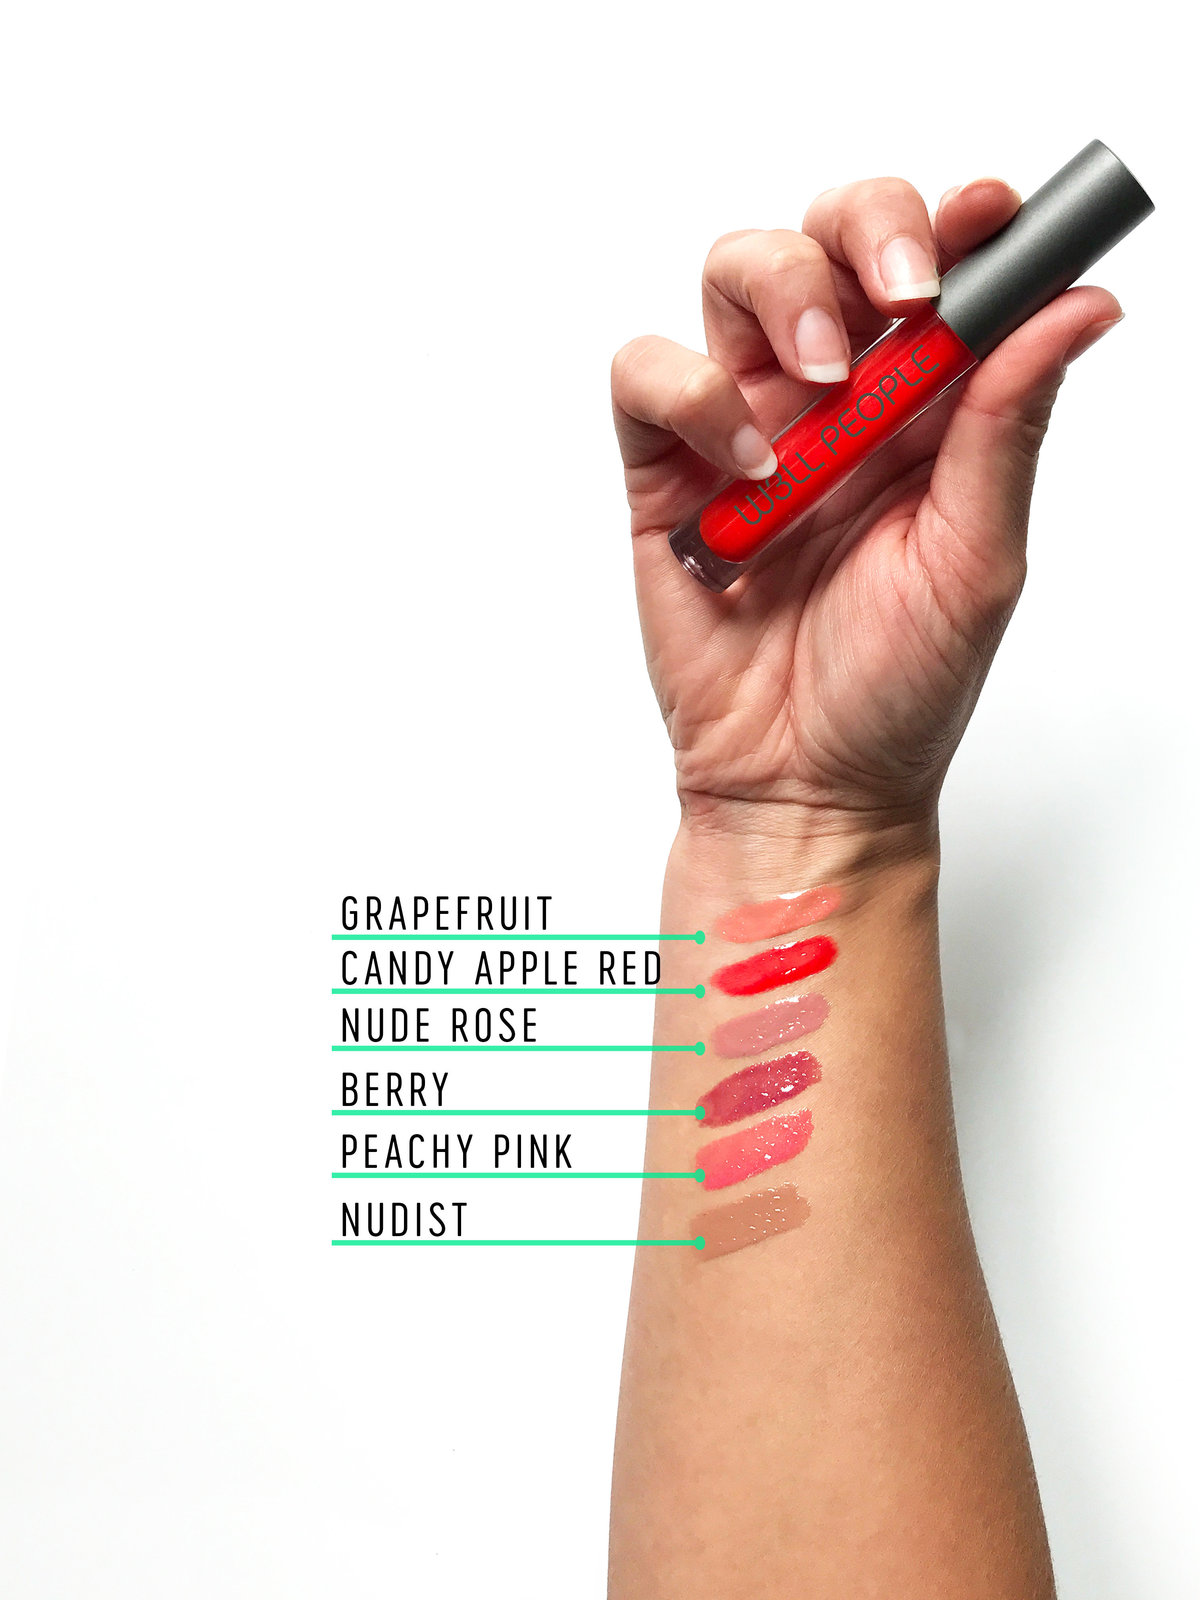 BIO EXTREME LIPGLOSSES SWATCHED